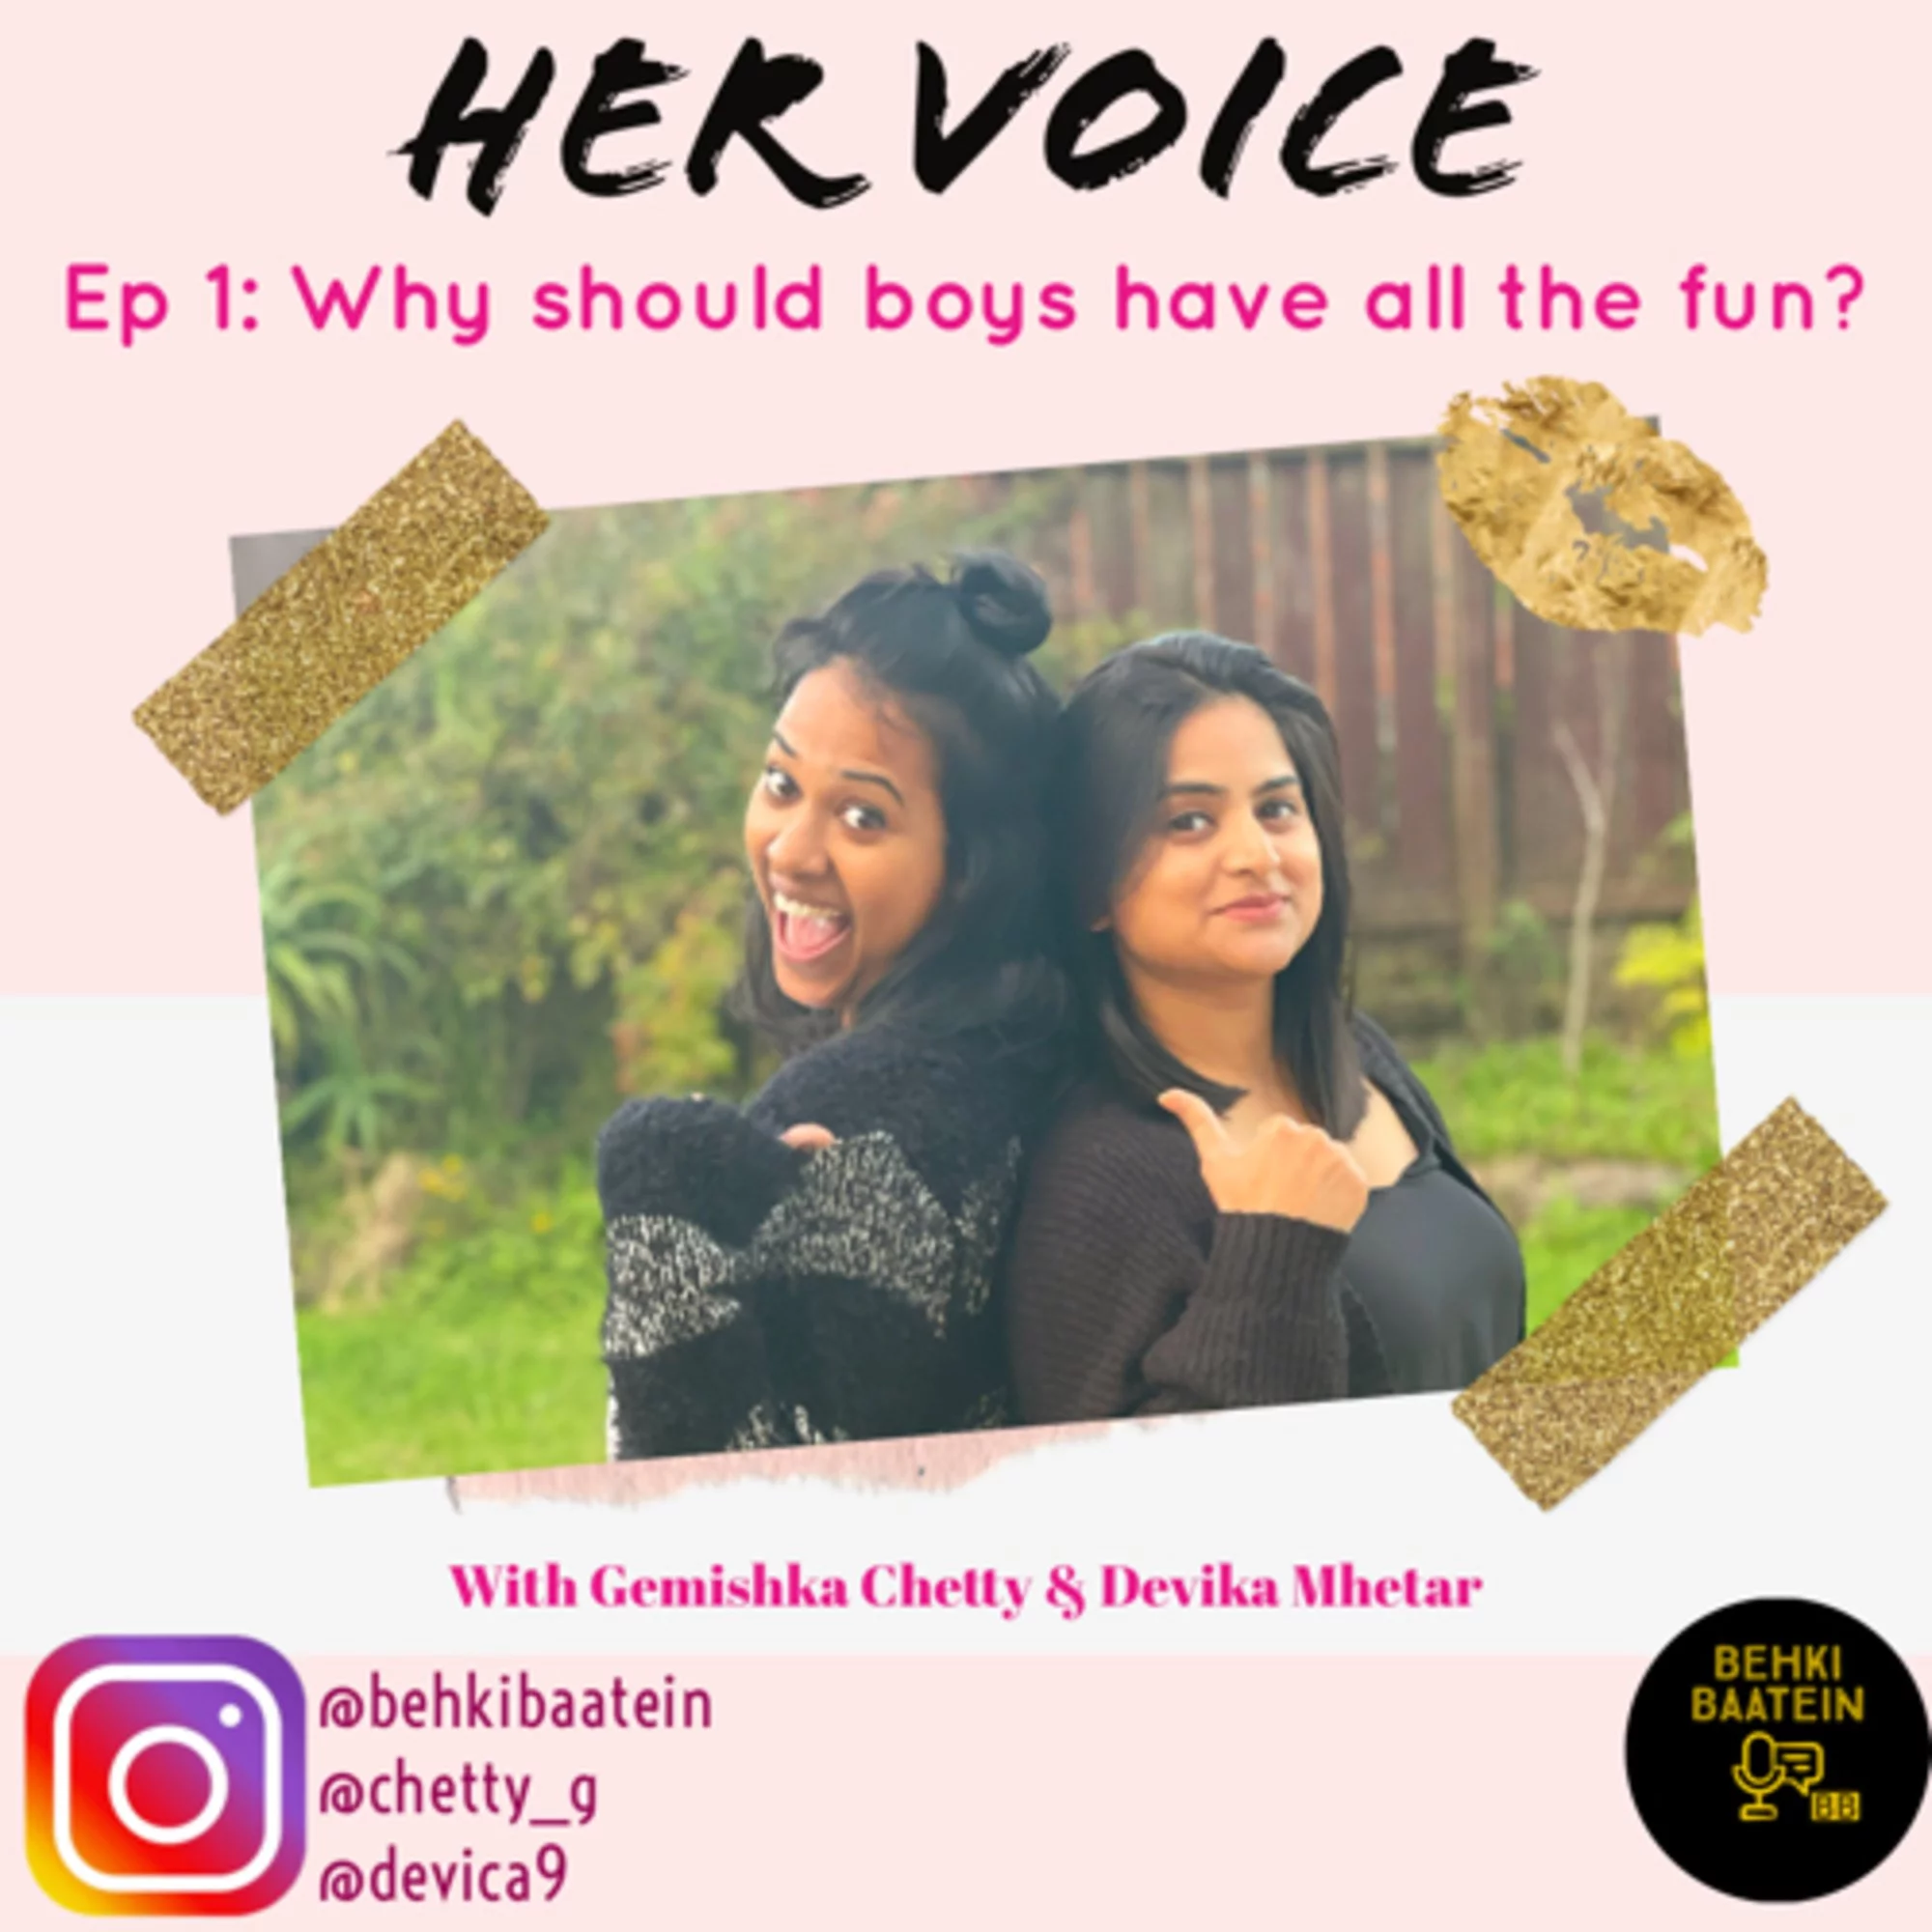 Her Voice - Ep 1: Why should boys have all the fun? With Devika Mhetar and Gemishka Chetty | 